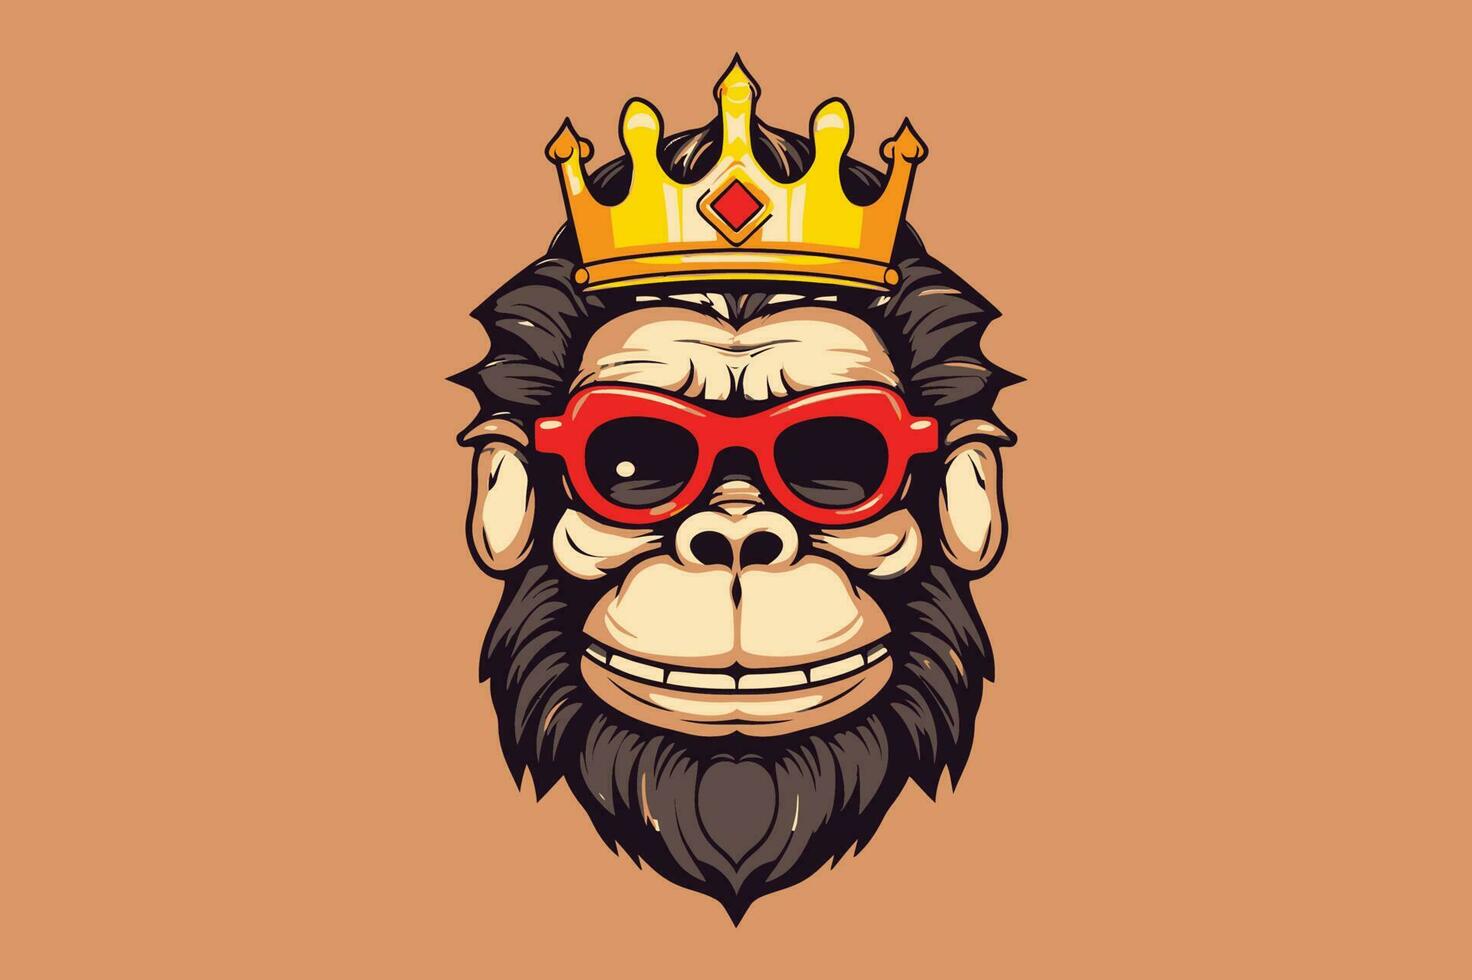 King Kong Monkey With smile Wearing Glasses or Googles And a crown Mascot Logo Vector Sublimation Design